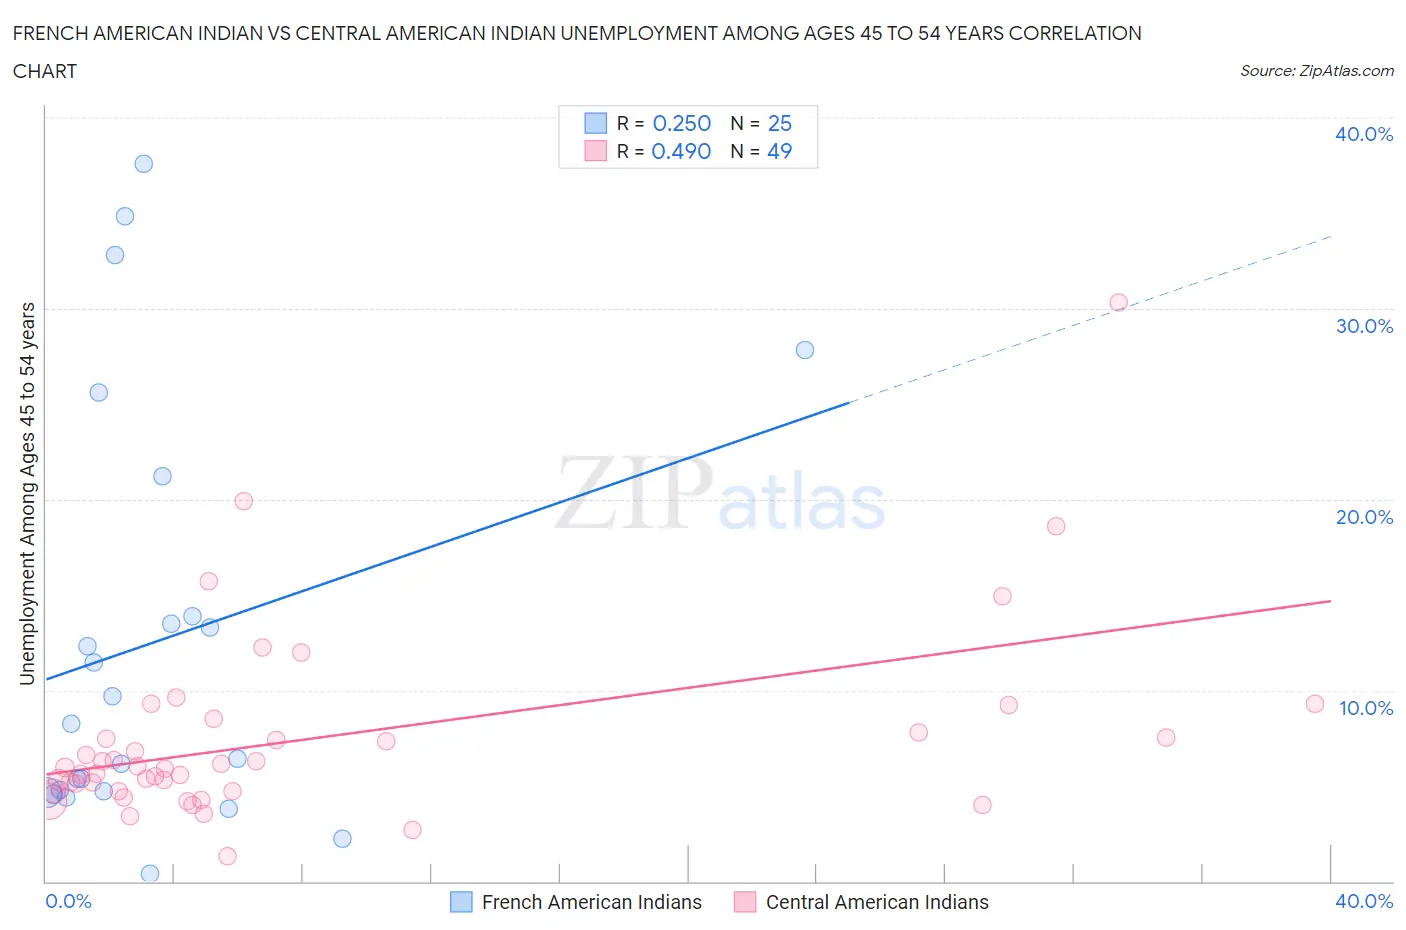 French American Indian vs Central American Indian Unemployment Among Ages 45 to 54 years